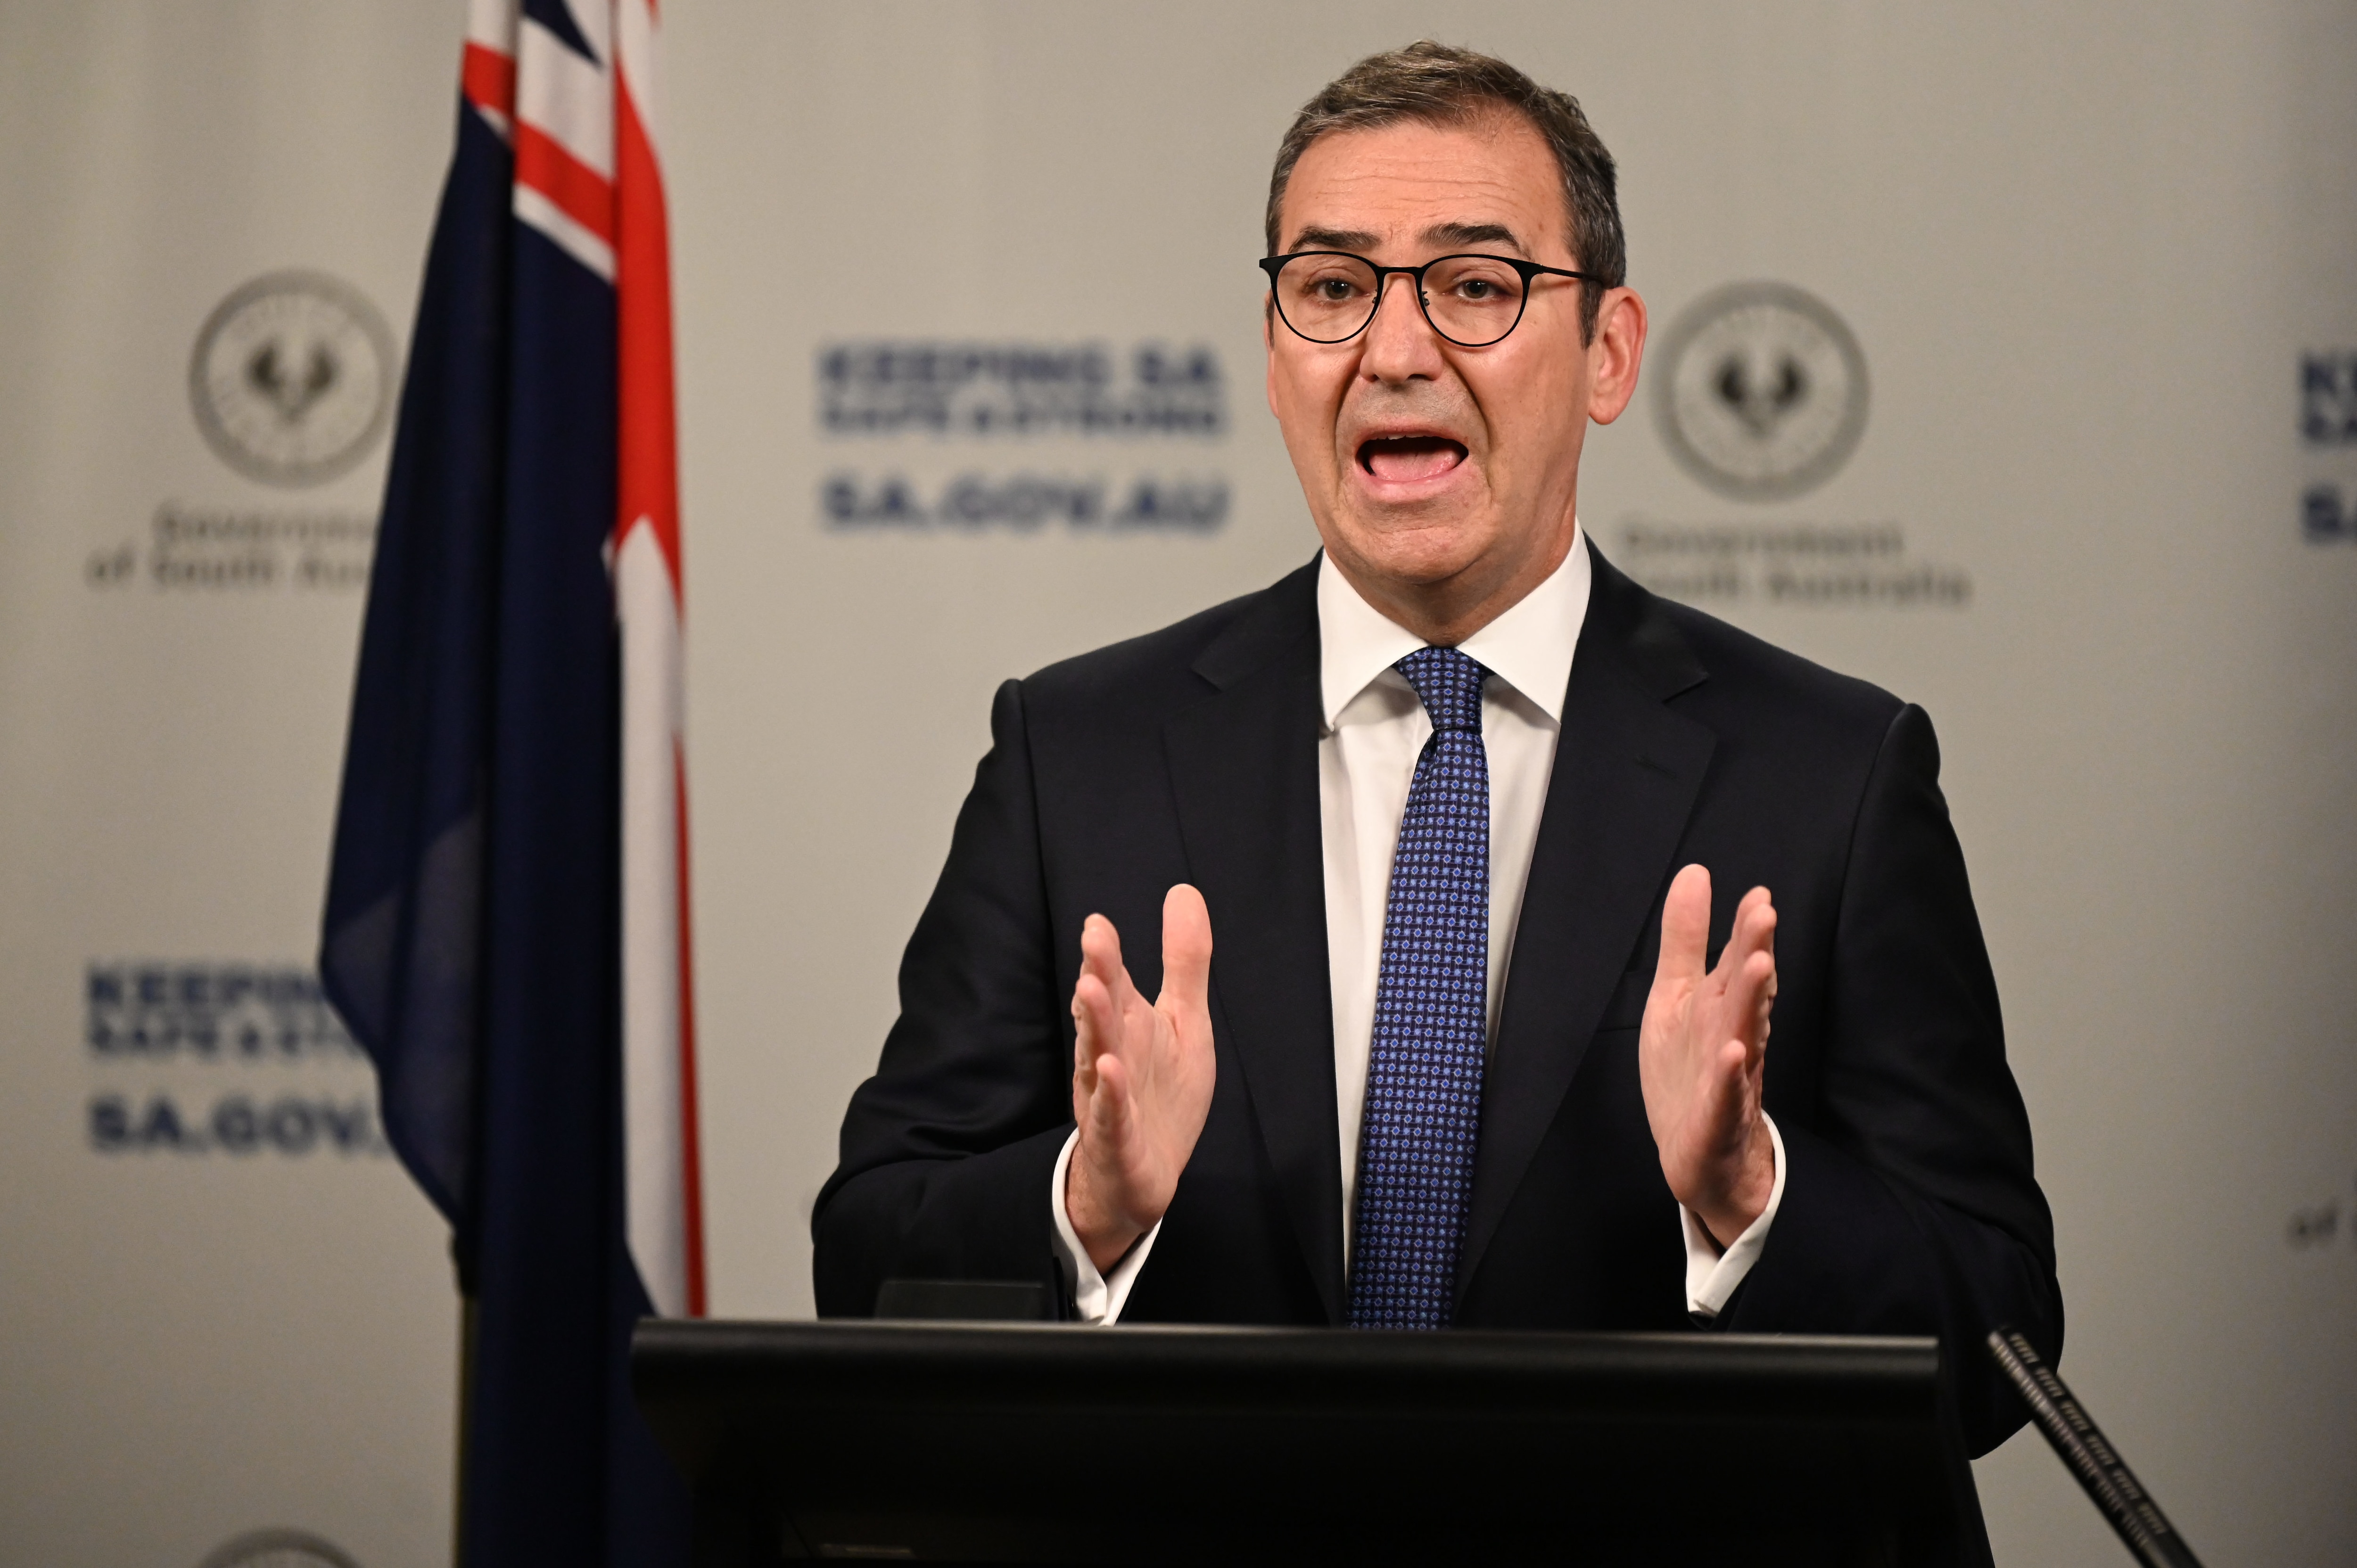 South Australia Prime Minister Steven Marshall addresses the media at a press conference in Adelaide.